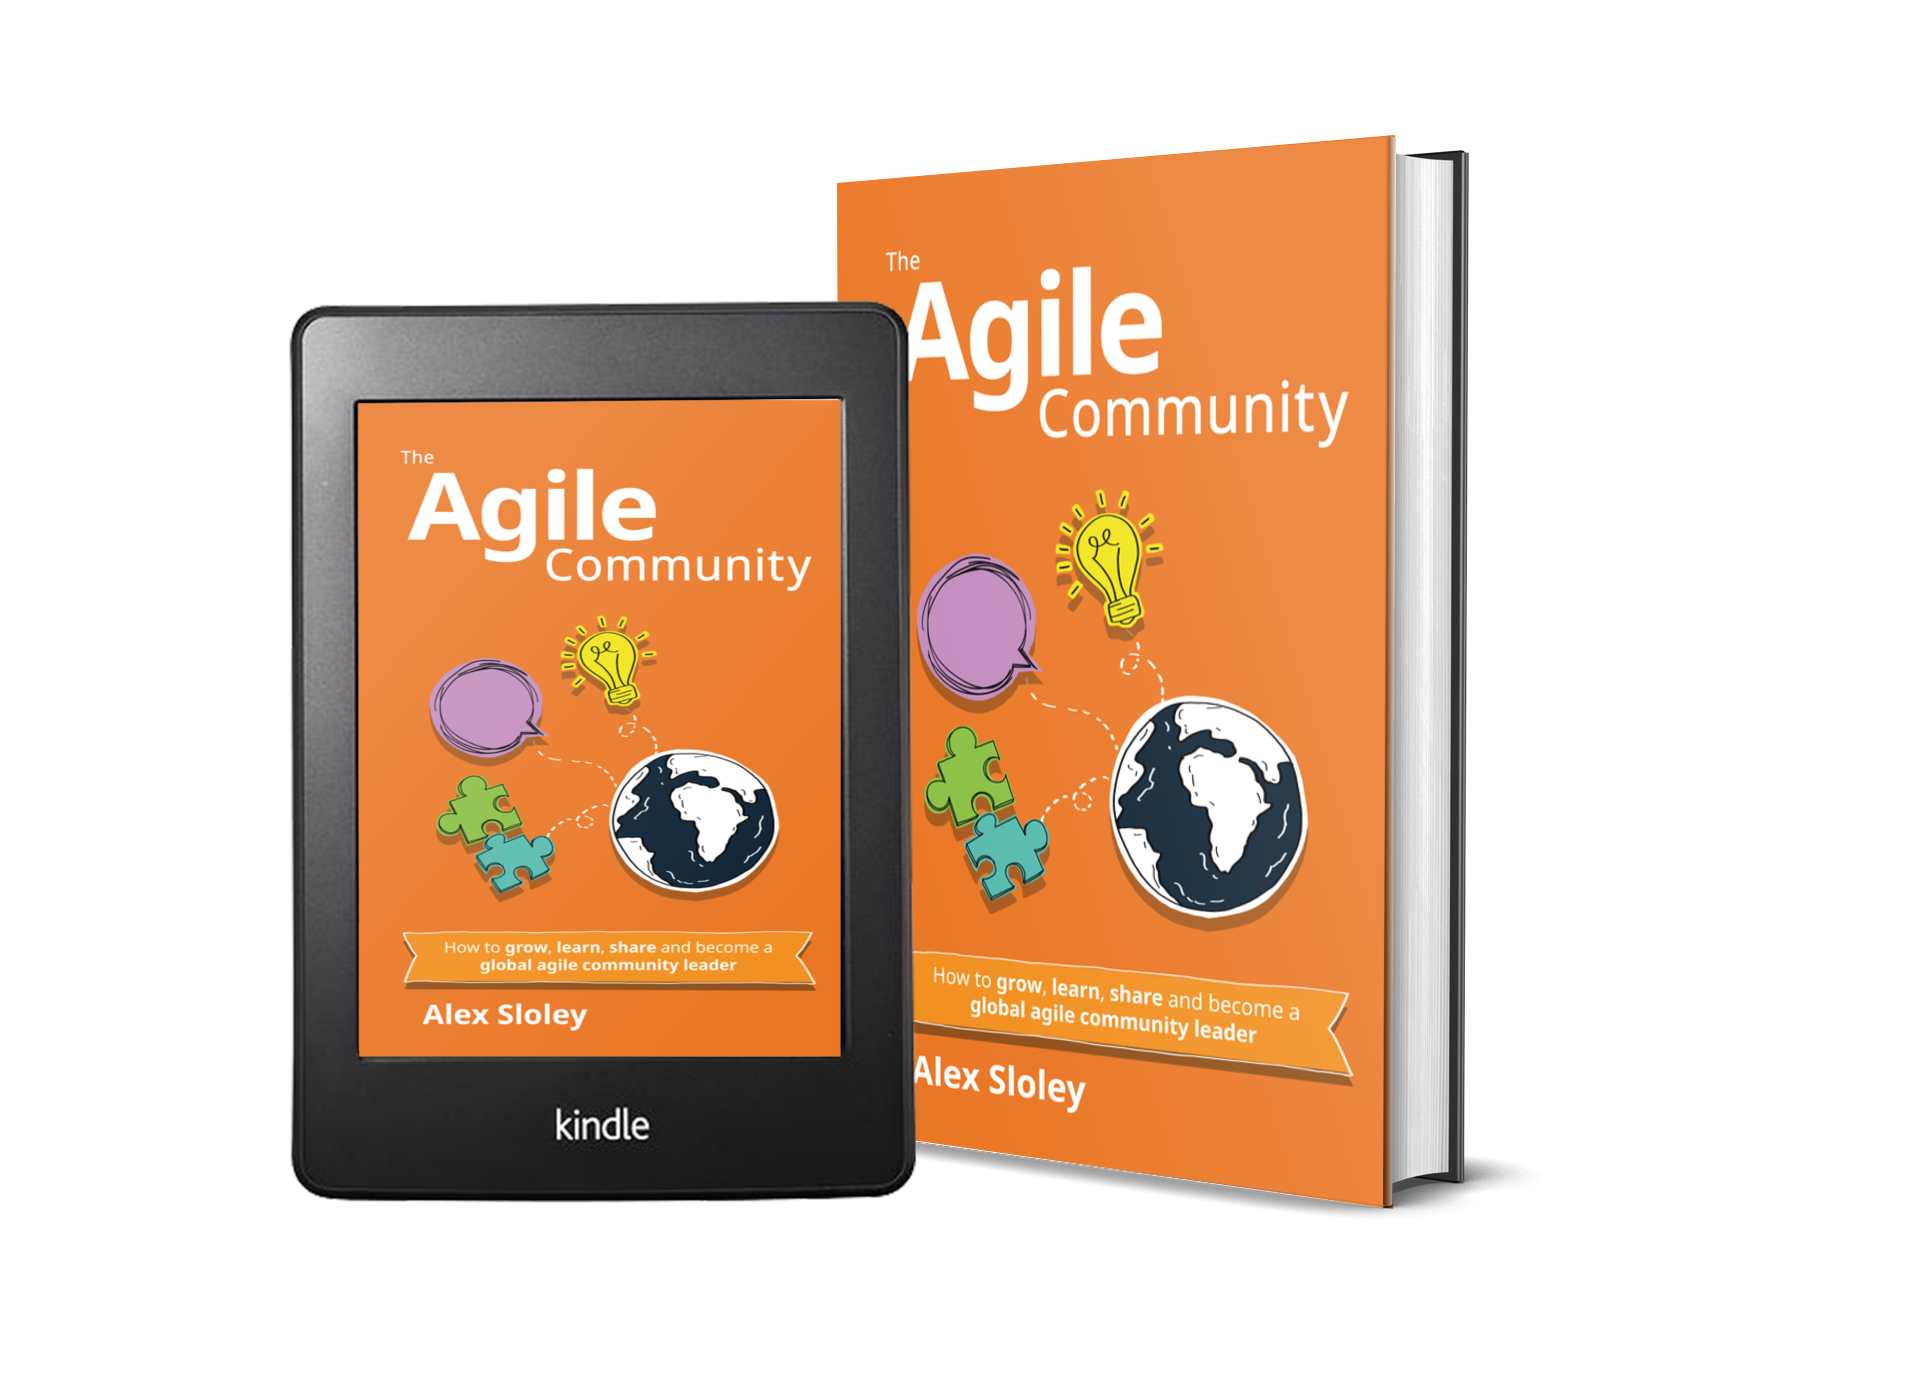 The Agile Community: How to Grow, Learn, Share, and become a Global Agile Community Leader